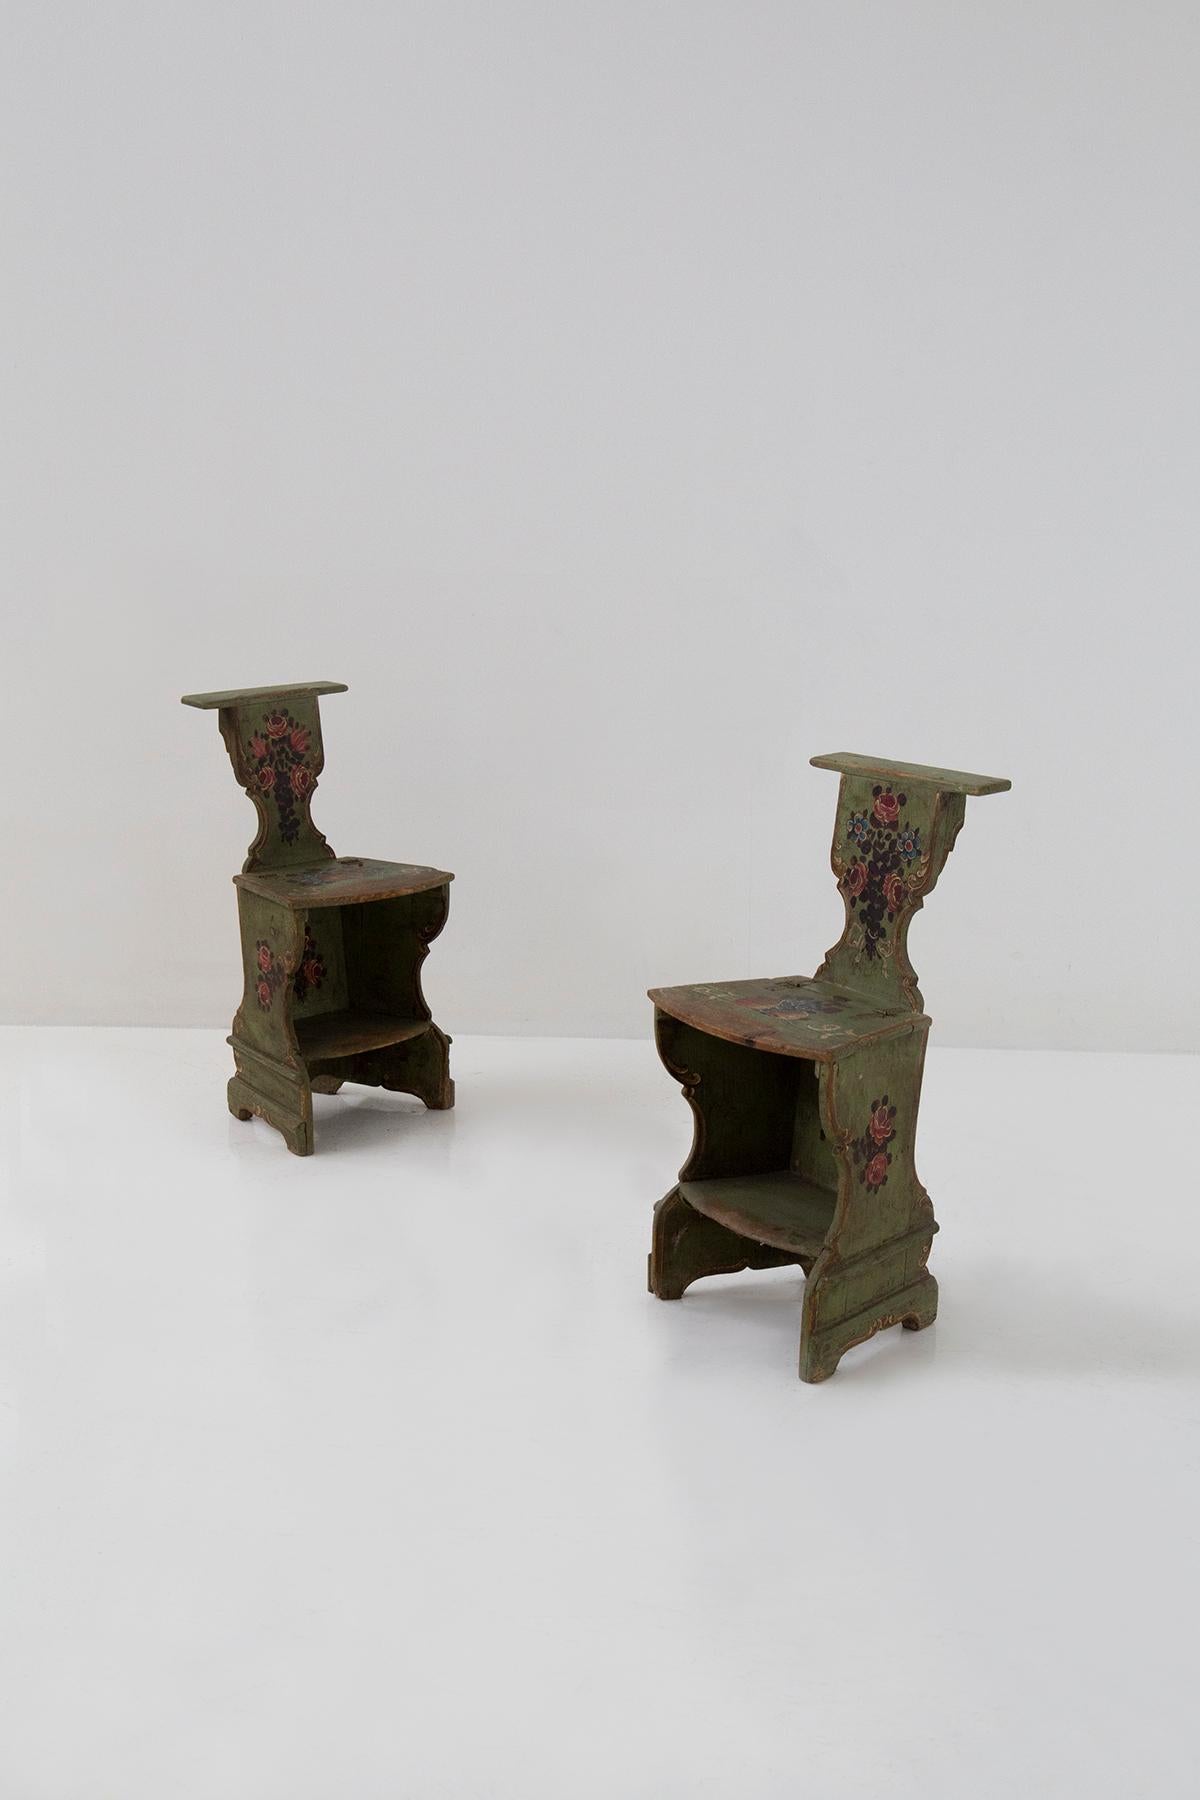 A pair of antique chairs, created from walnut wood with a polychrome technique, honours us with its presence, testimony to a bygone era. Admire their majesty, for they date back to the late 1700s and their age is engraved on the seat in ancient